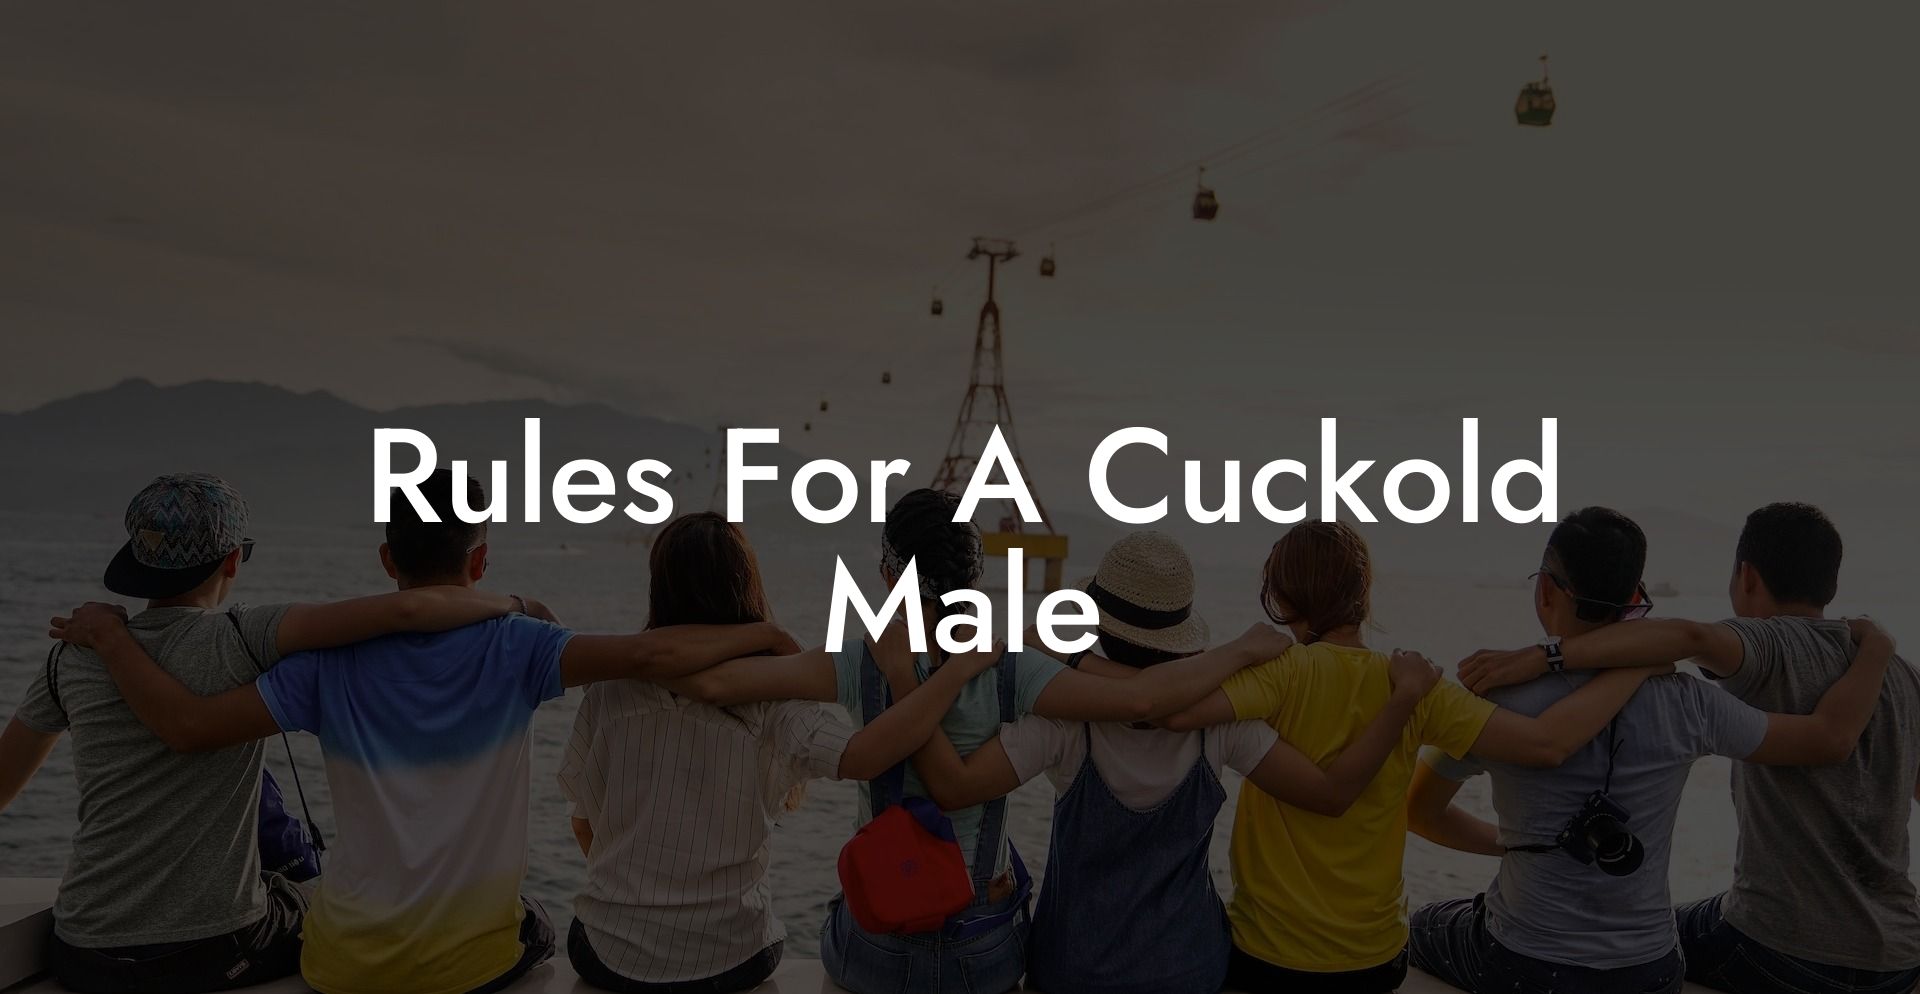 Rules For A Cuckold Male